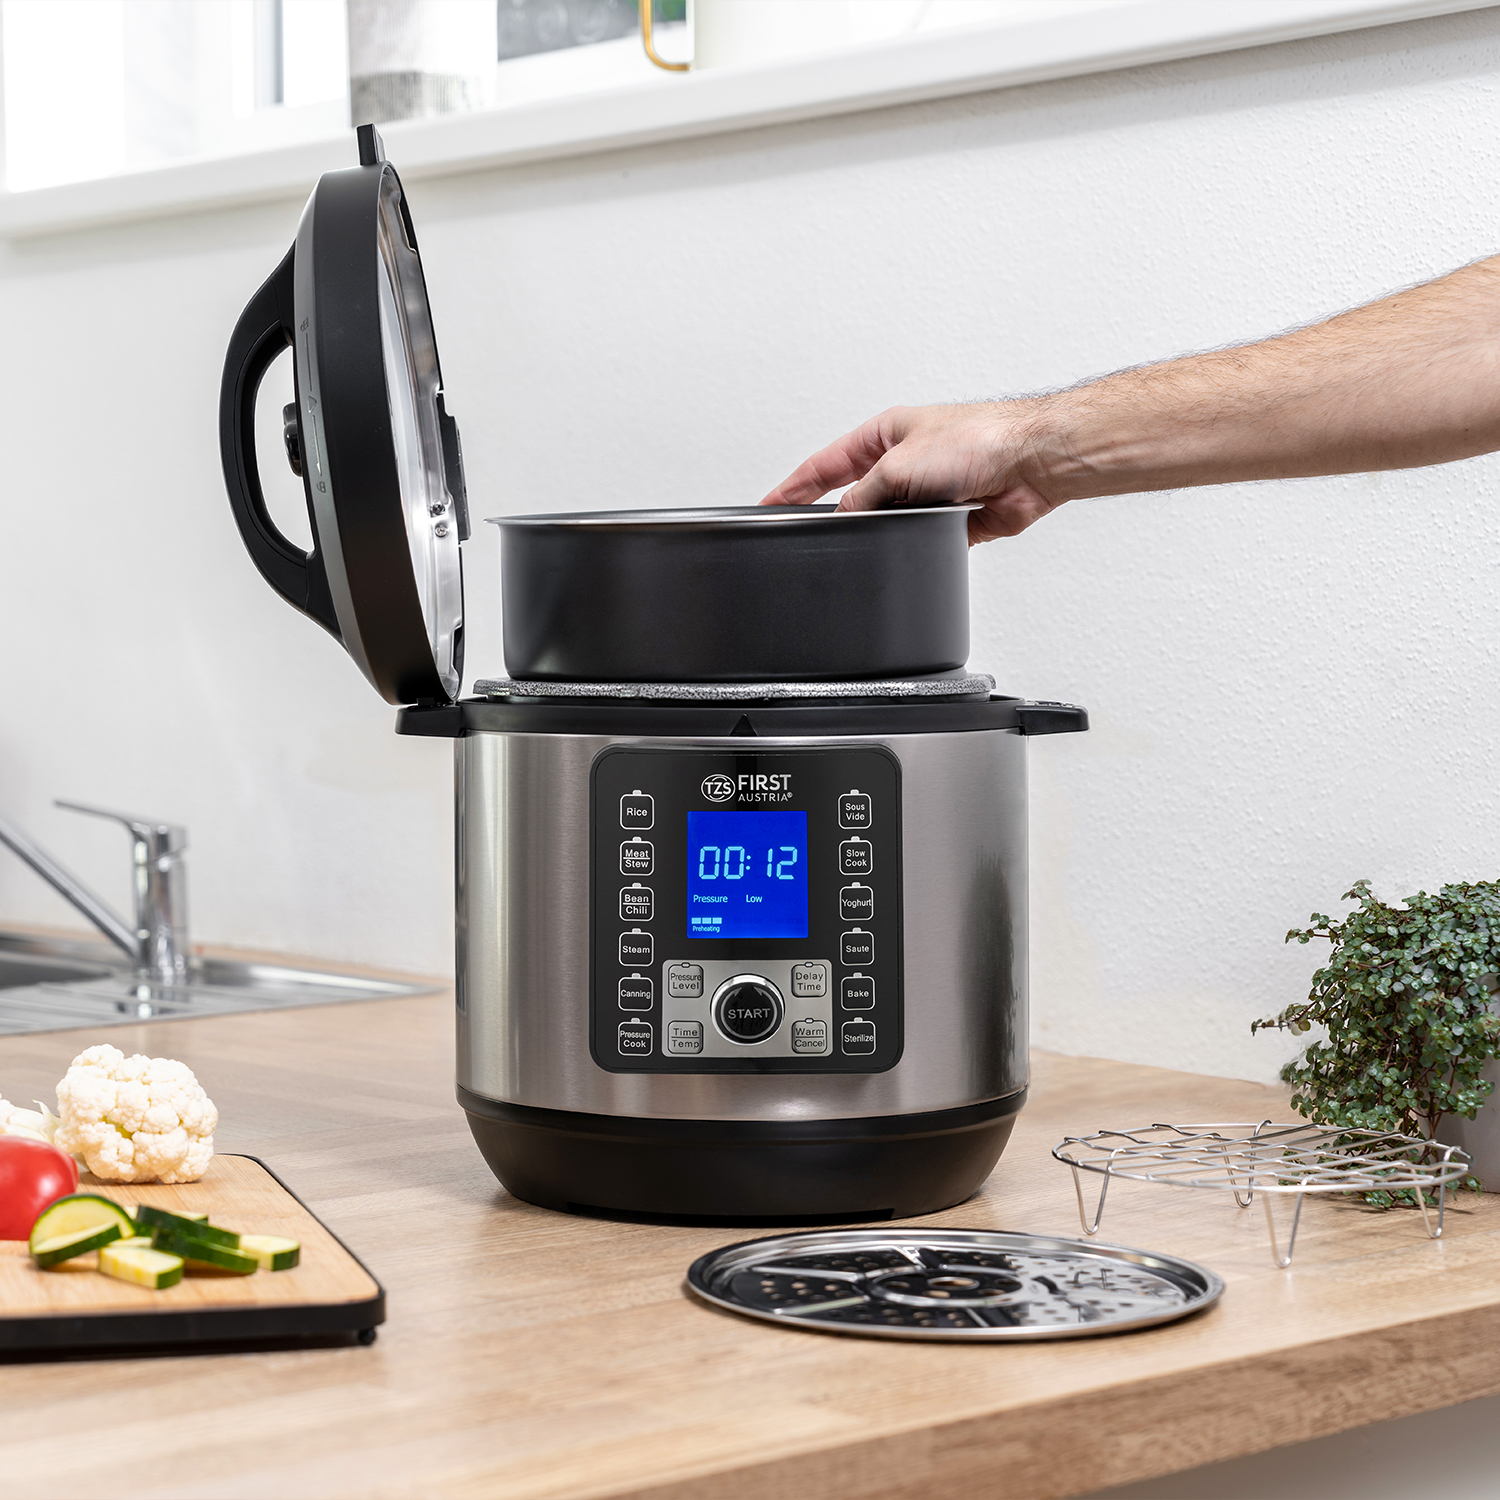 Pressure cooker electronic | 6 litres